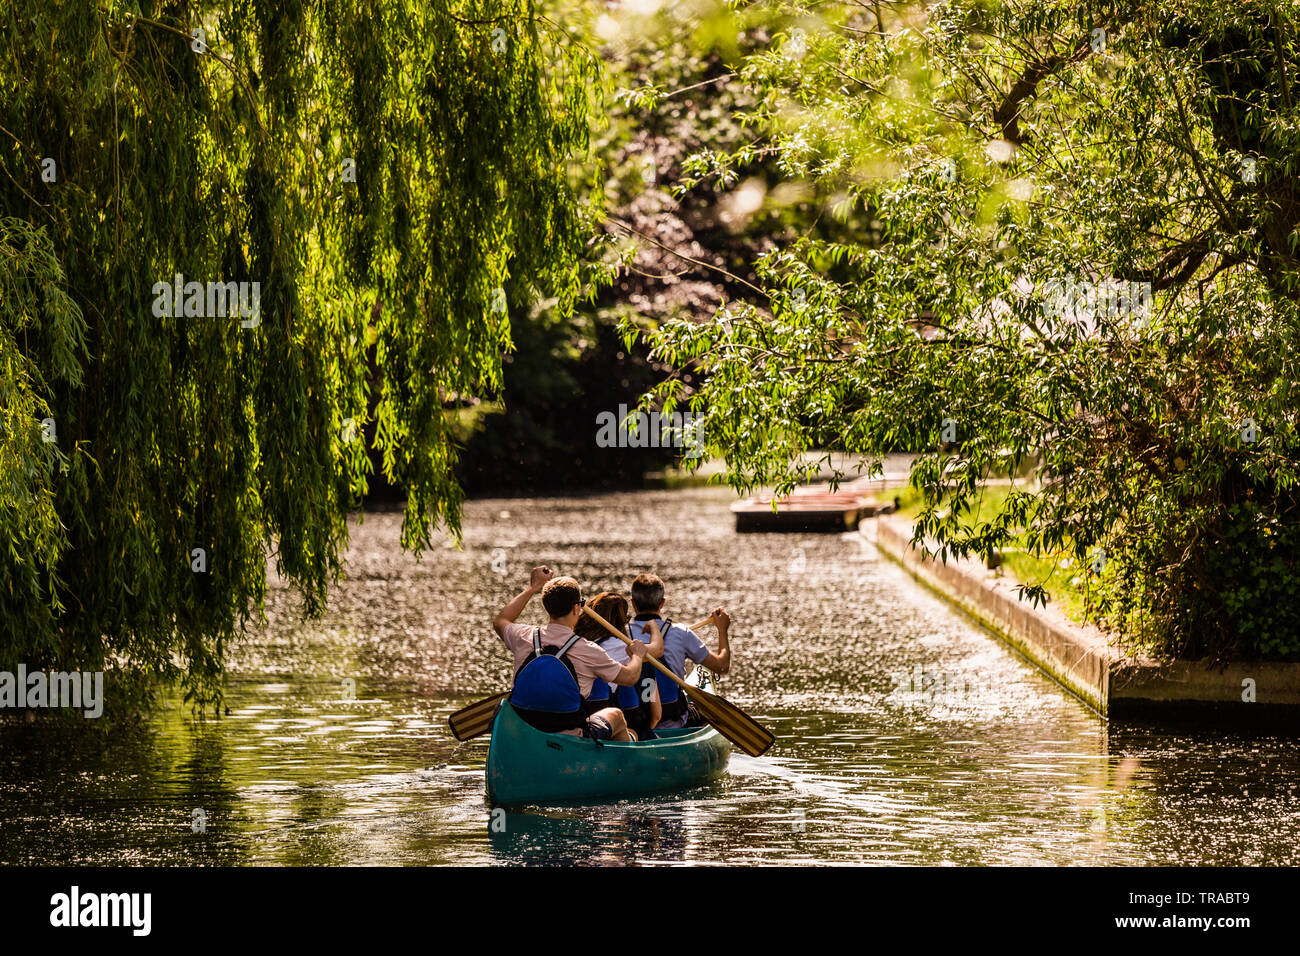 Four people take to the River Cam, Cambridge in a hired canoe. Canoes can be hired from Granta Place Boatyard. Stock Photo